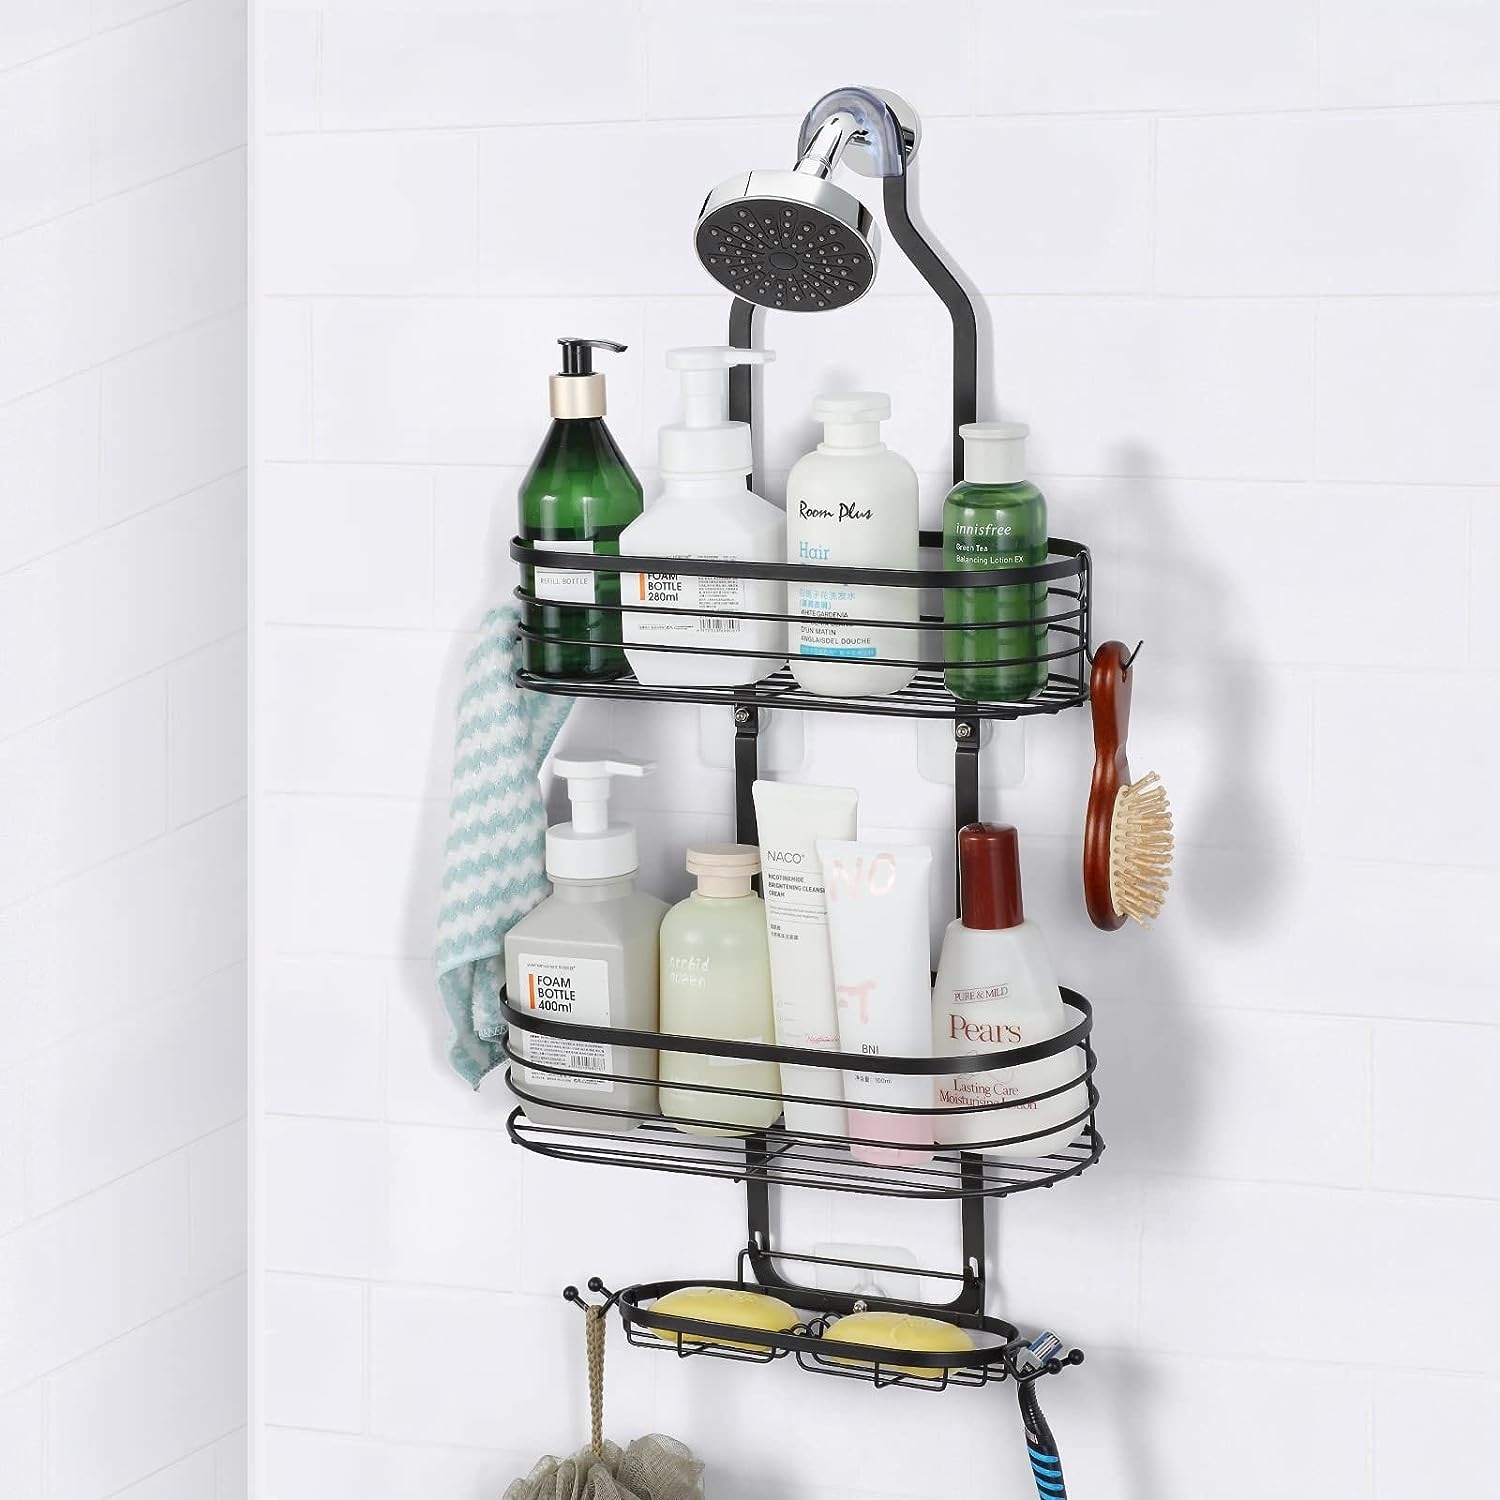 https://ak1.ostkcdn.com/images/products/is/images/direct/6261f545a78f9b743fdf7dfbb3bd9077e02ce4c4/Bathroom-Shower-Caddy-Over-The-Door-with-Hook-%26-Soap-Box.jpg